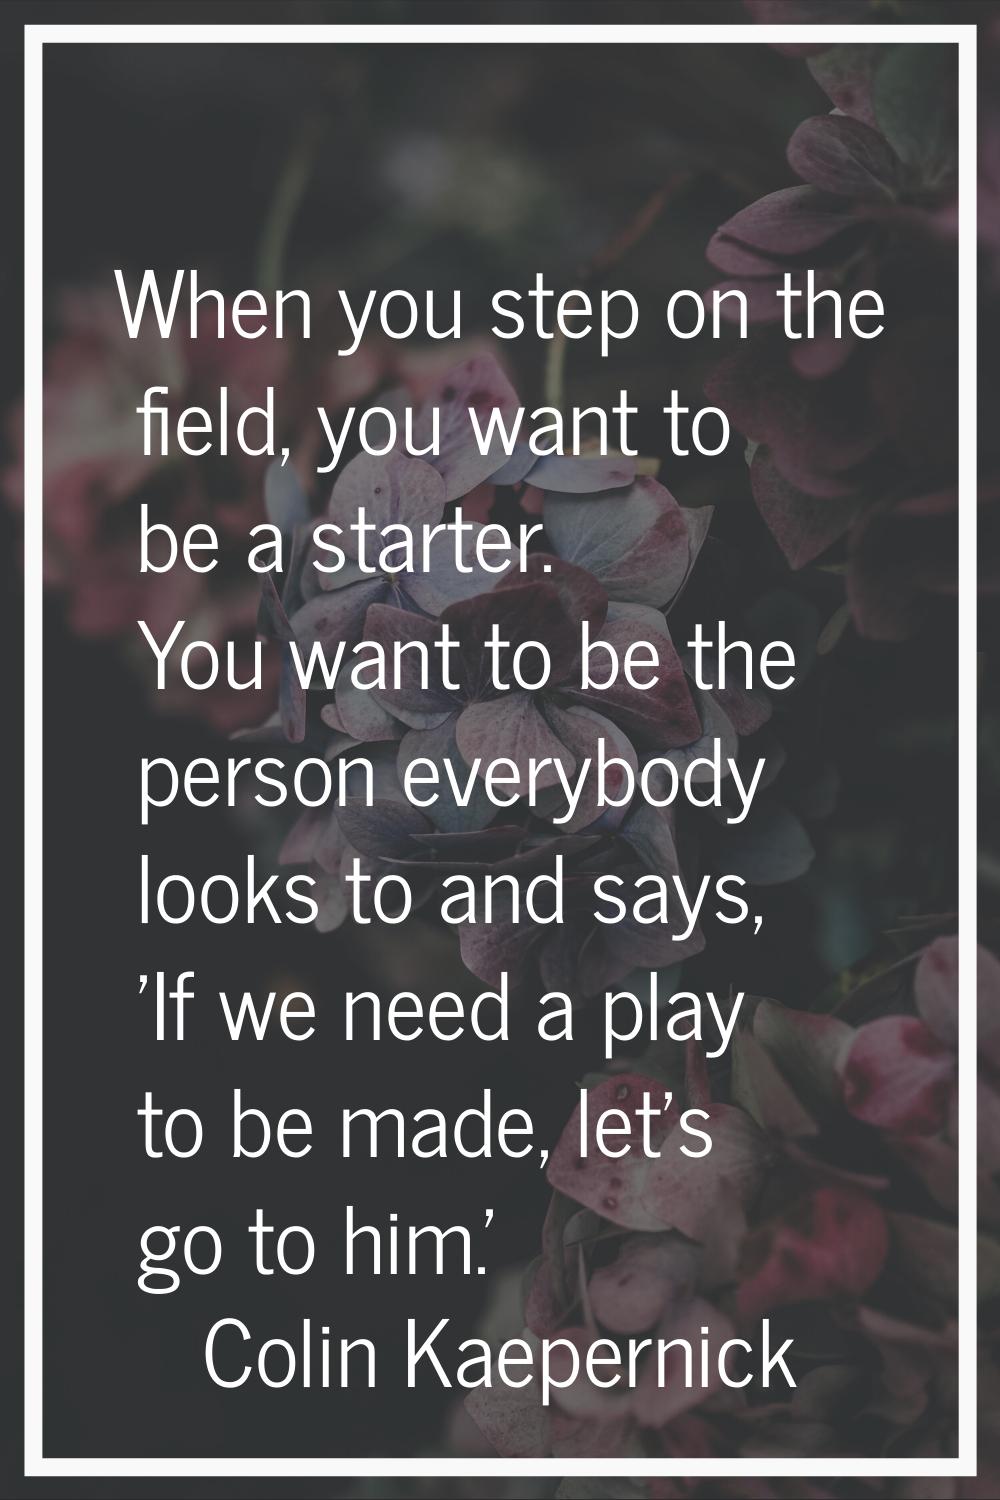 When you step on the field, you want to be a starter. You want to be the person everybody looks to 